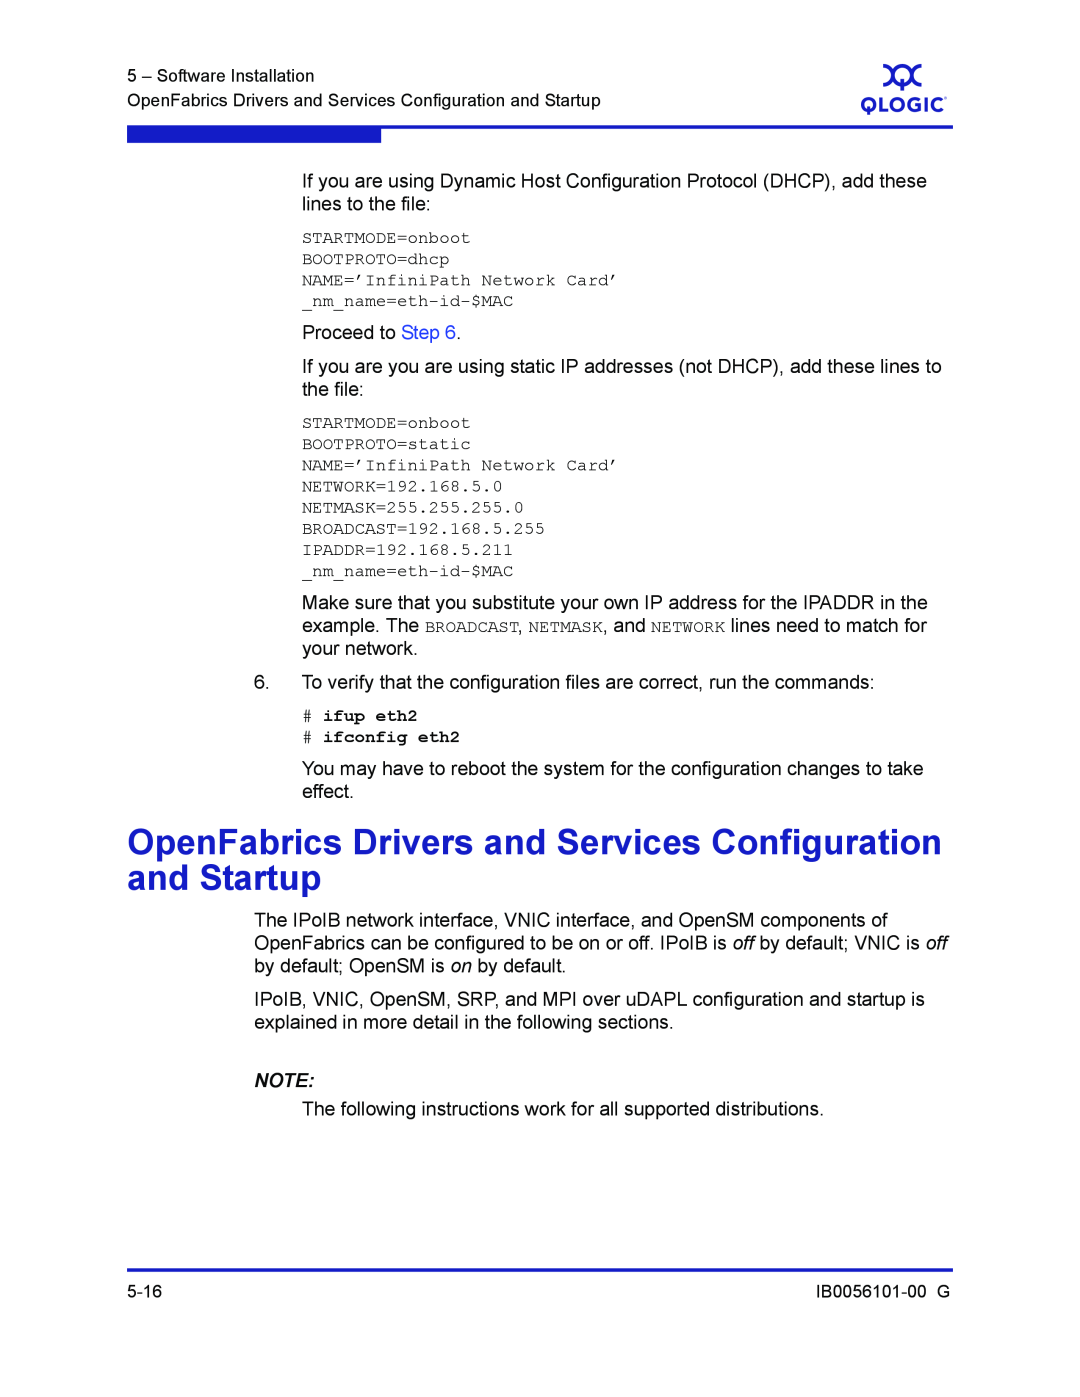 Q-Logic IB0056101-00 G manual OpenFabrics Drivers and Services Configuration and Startup 